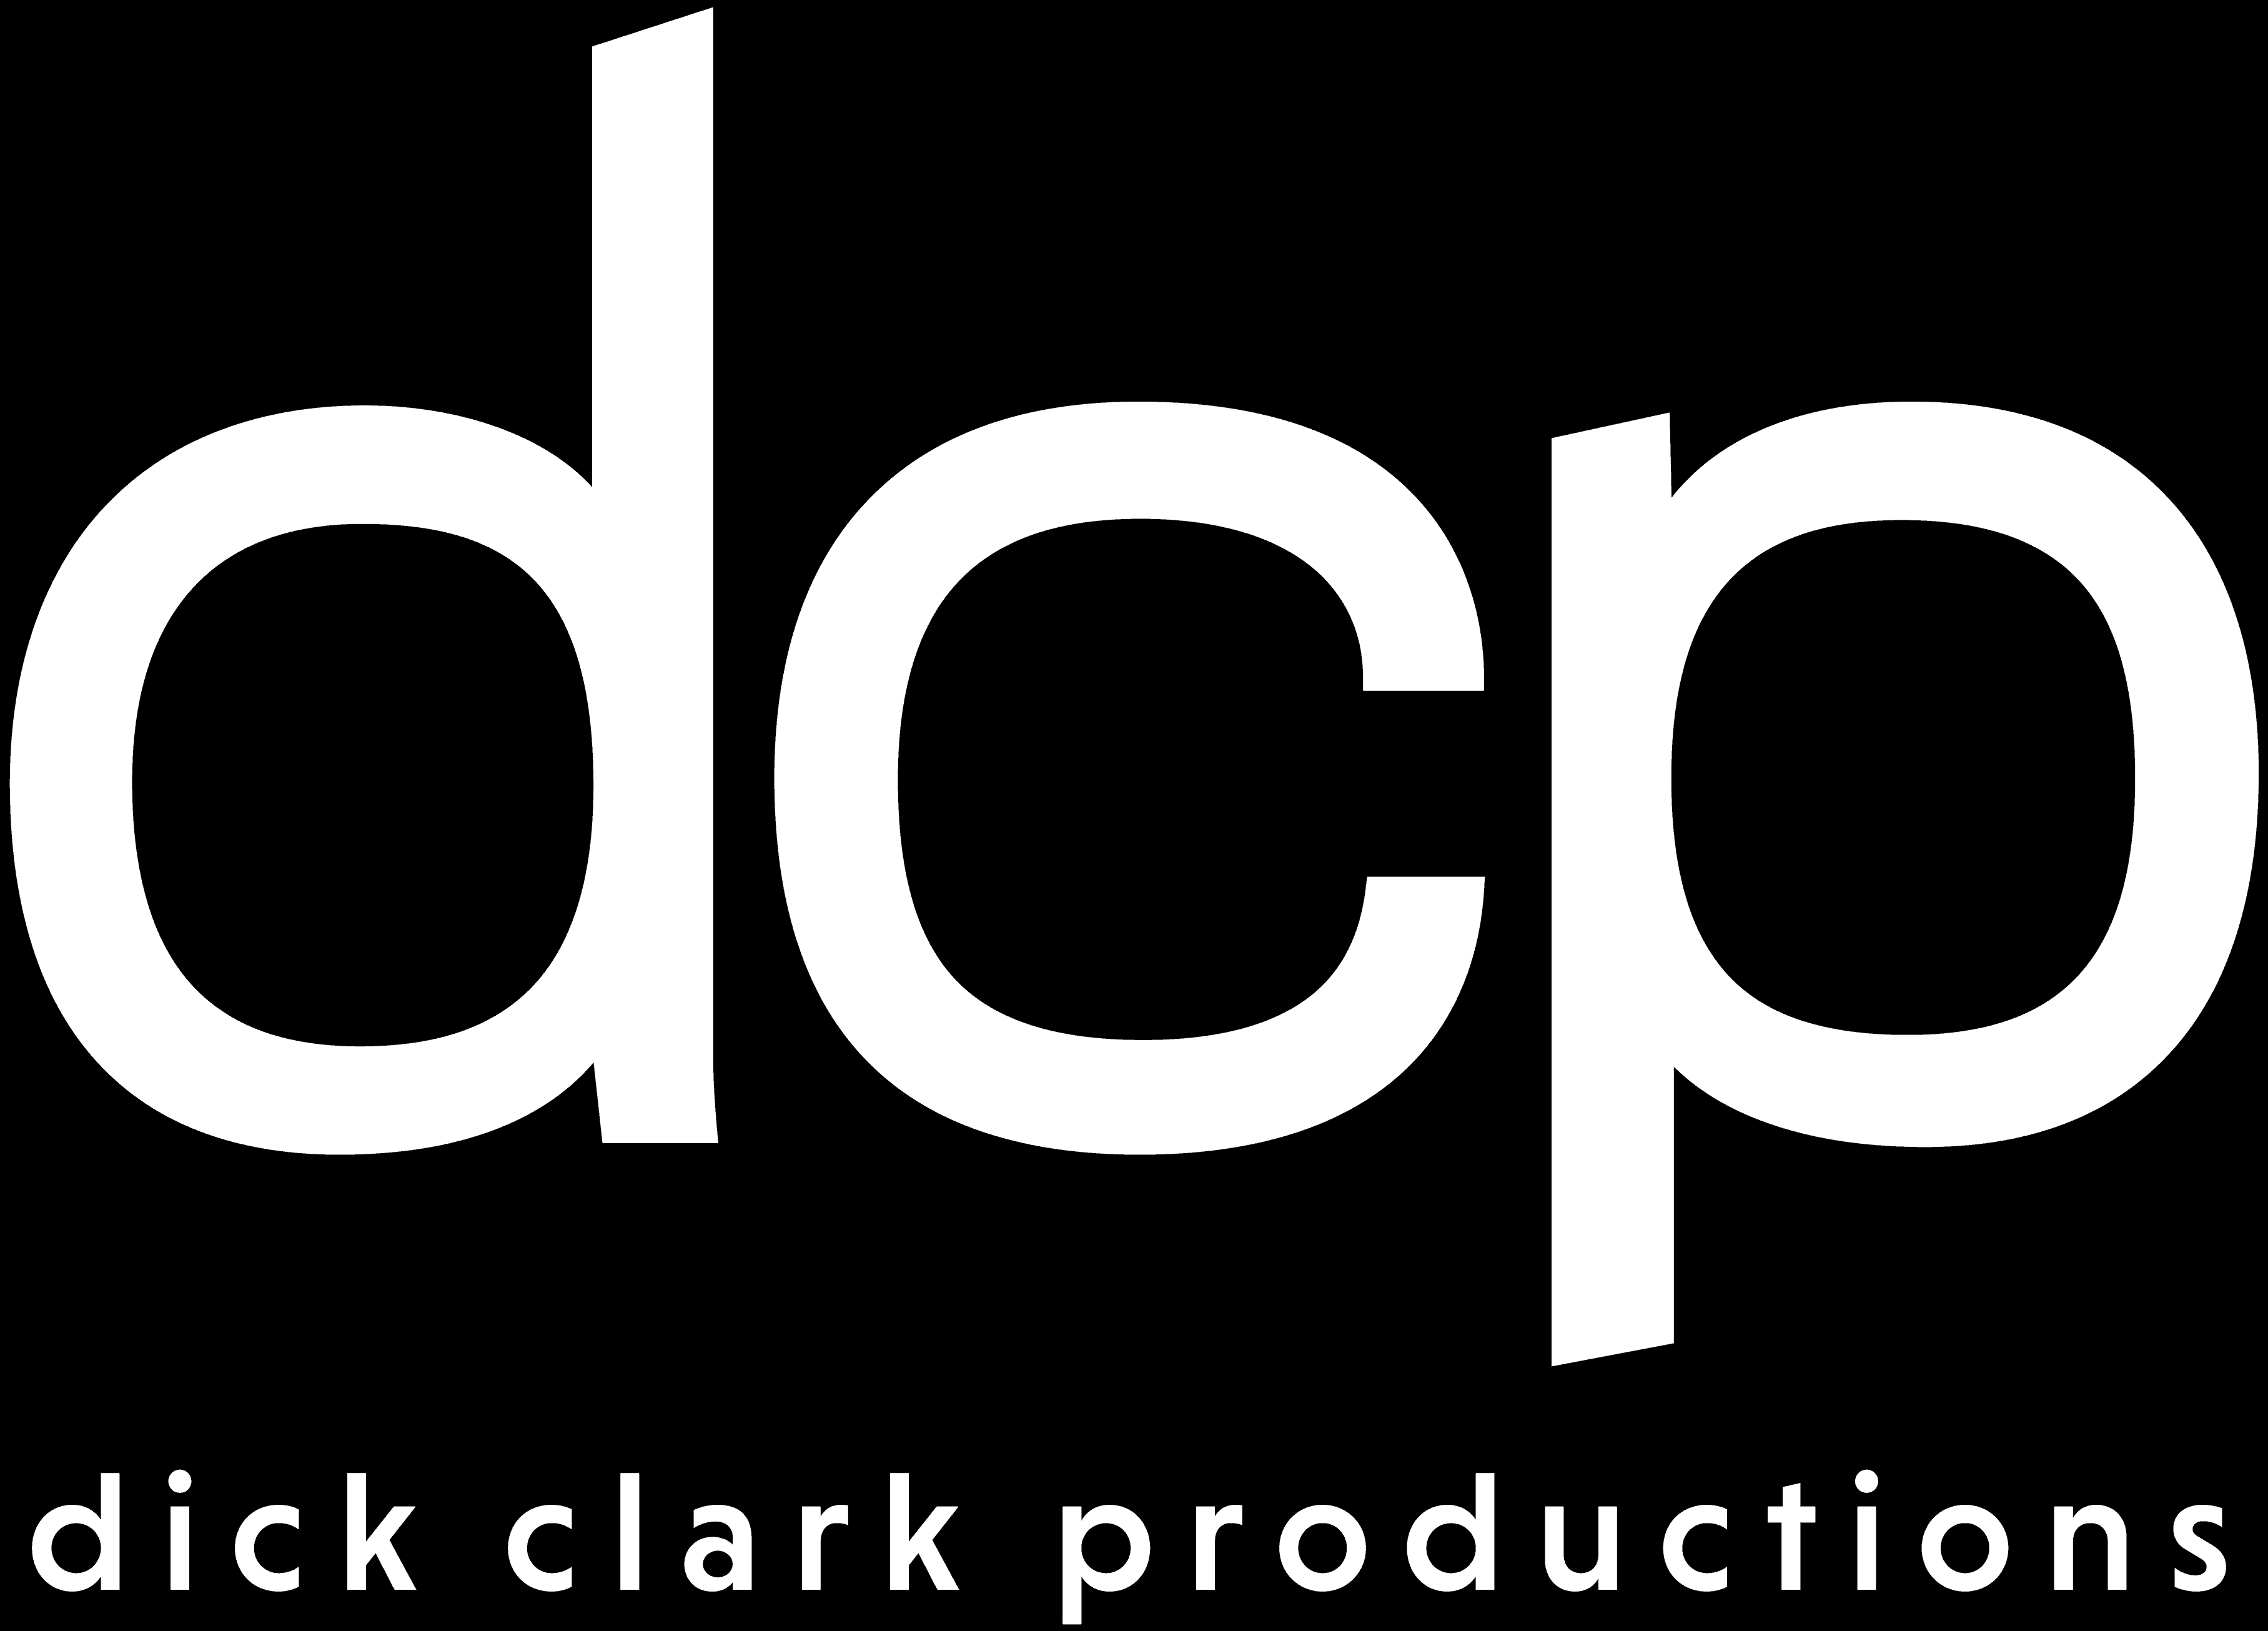 Dick clark productions human resources